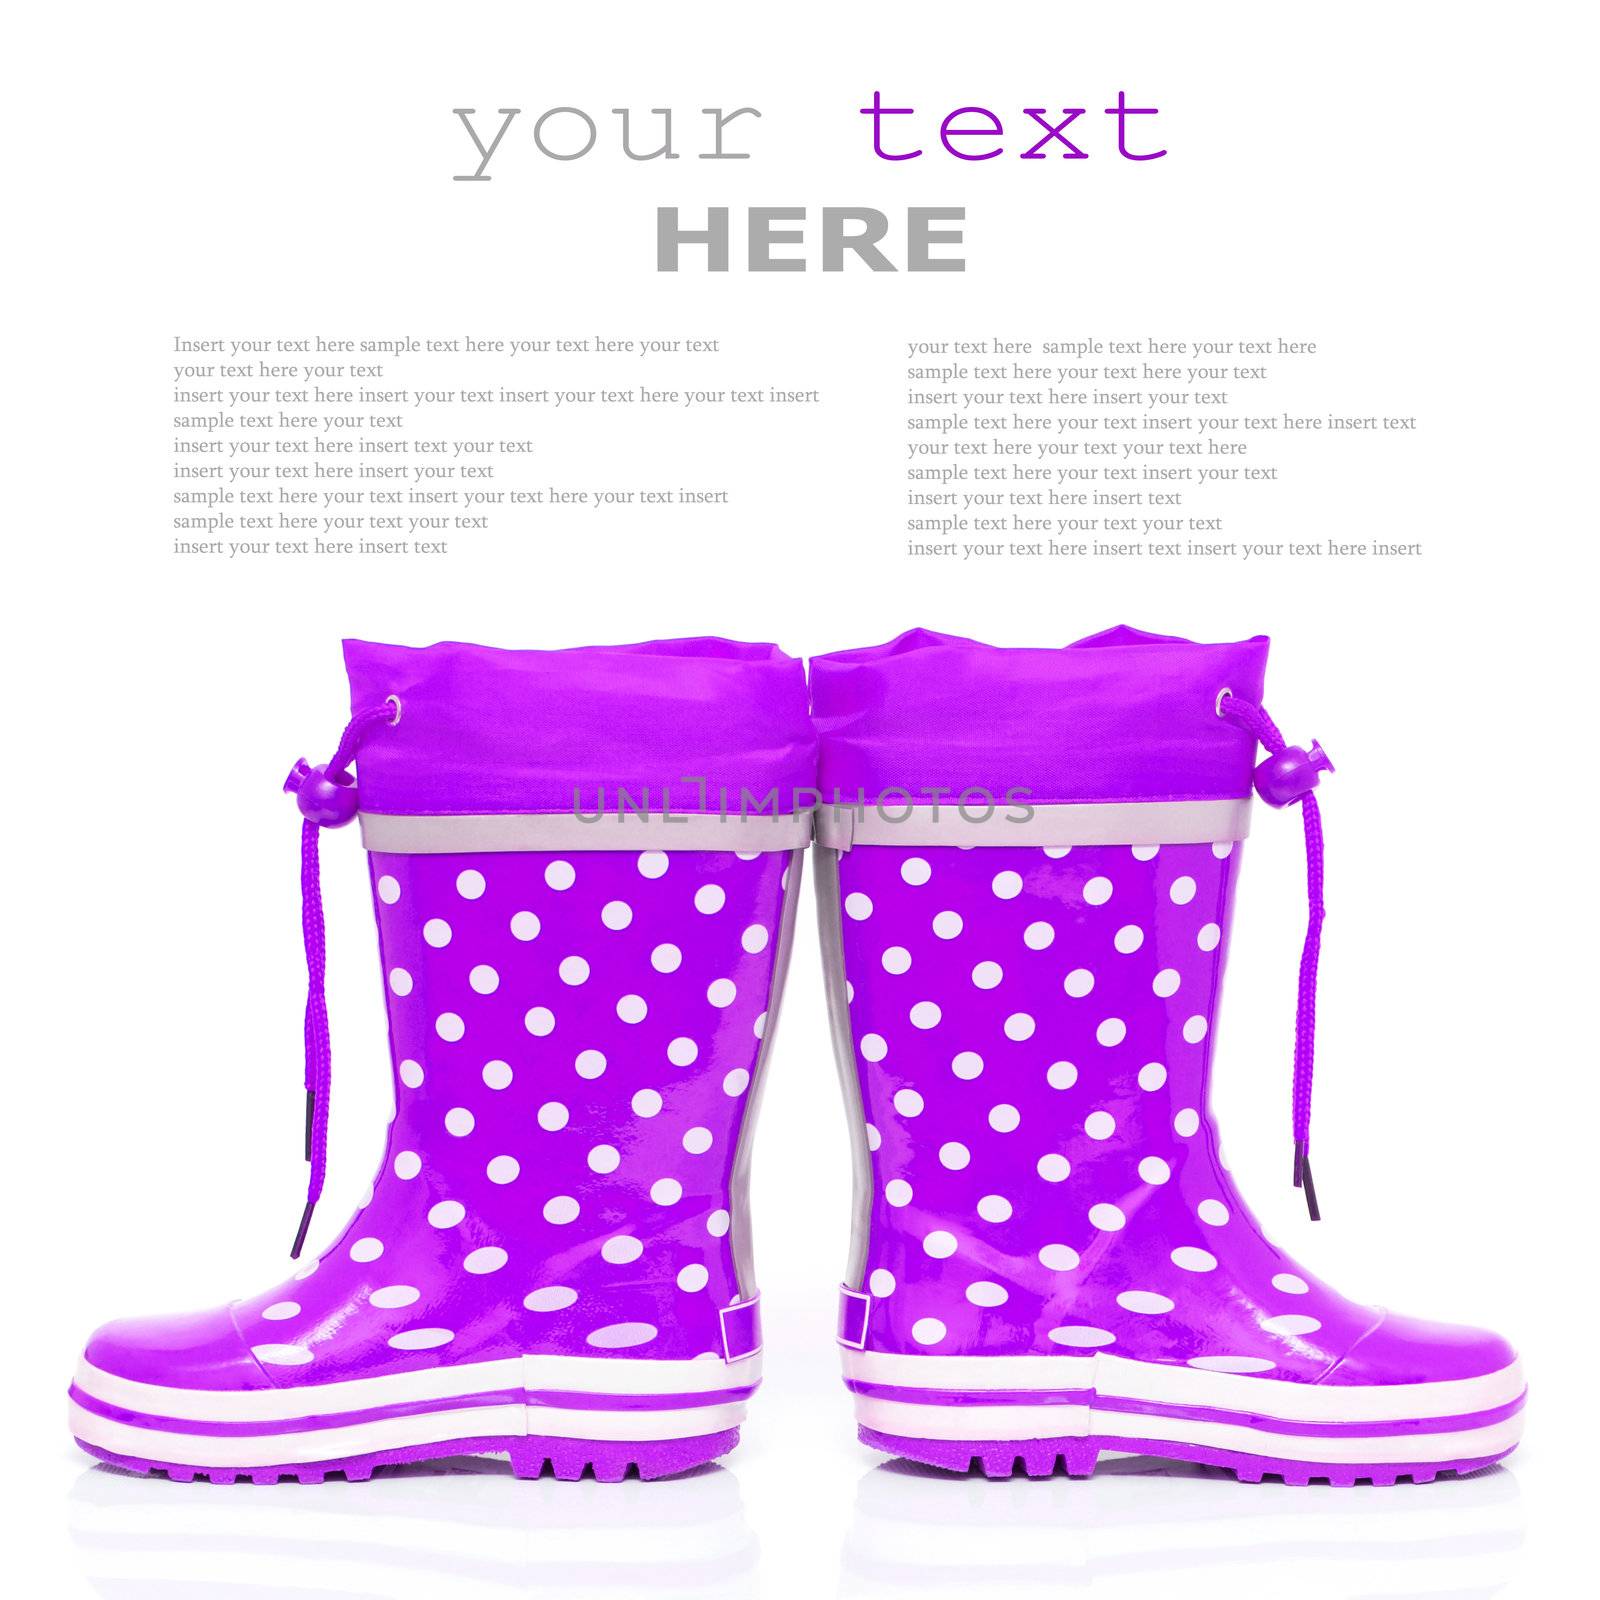 Purple rubber boots for kids isolated on white background (with sample text)